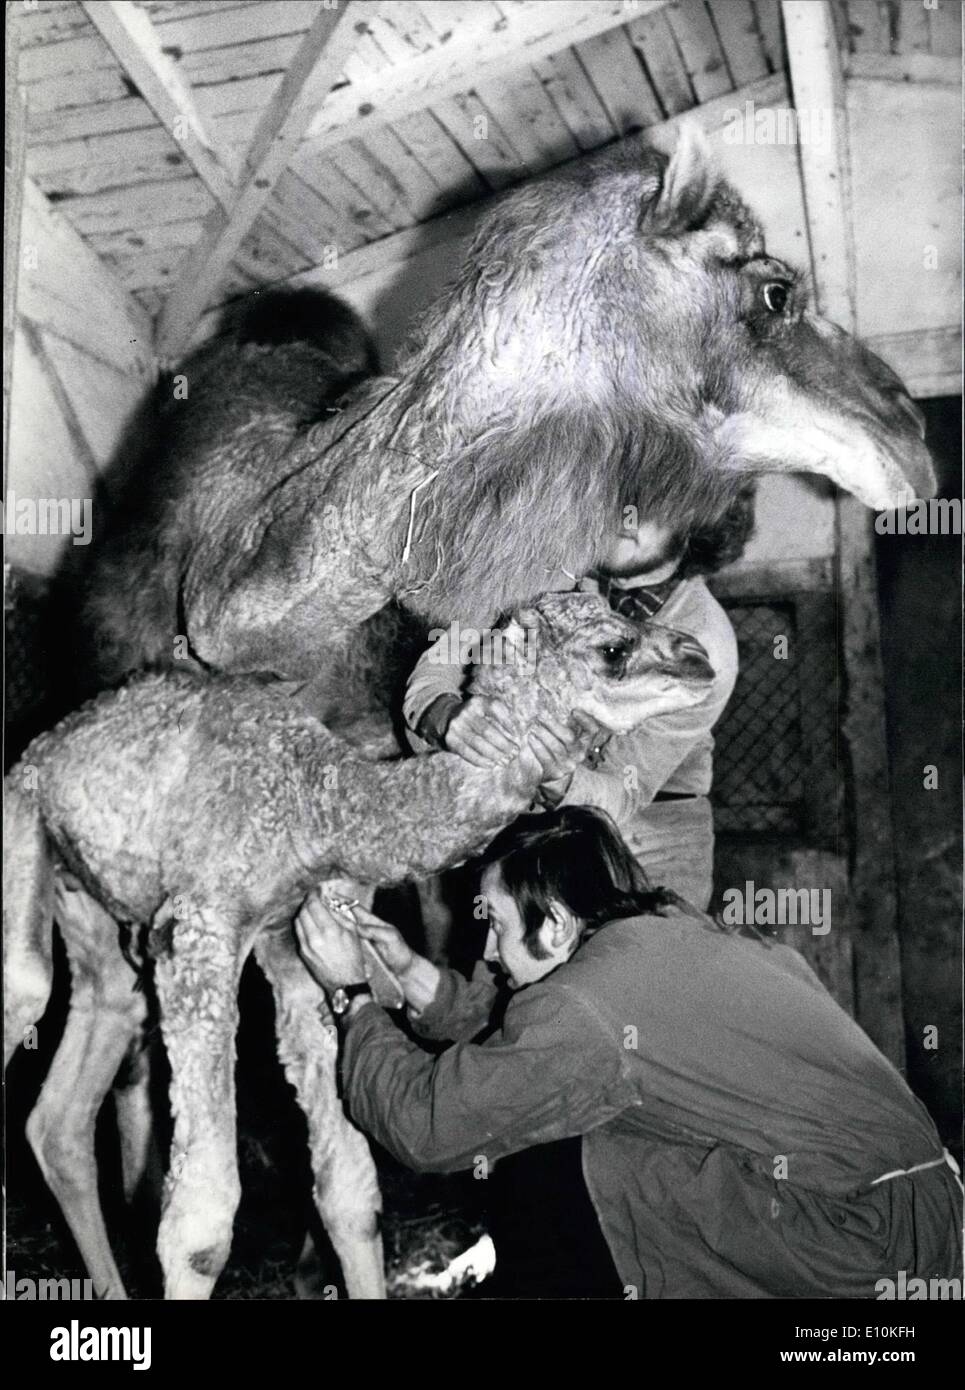 May 05, 1973 - Dromedary Baby in Munich's Hellaburn Zoo. This two week old baby Dromedary (born at Hellaburn Zoo), has to have an injection. Like small children he needs some helps in building up immunities childhood illnesses, and this one is also supposed to help strengthen his muscles and tendons. The little one stands with big eyes beside his mother Dora, and already weighs 40 Kg. and is 1,50 m high. He has three other larger, healthy brother. Stock Photo